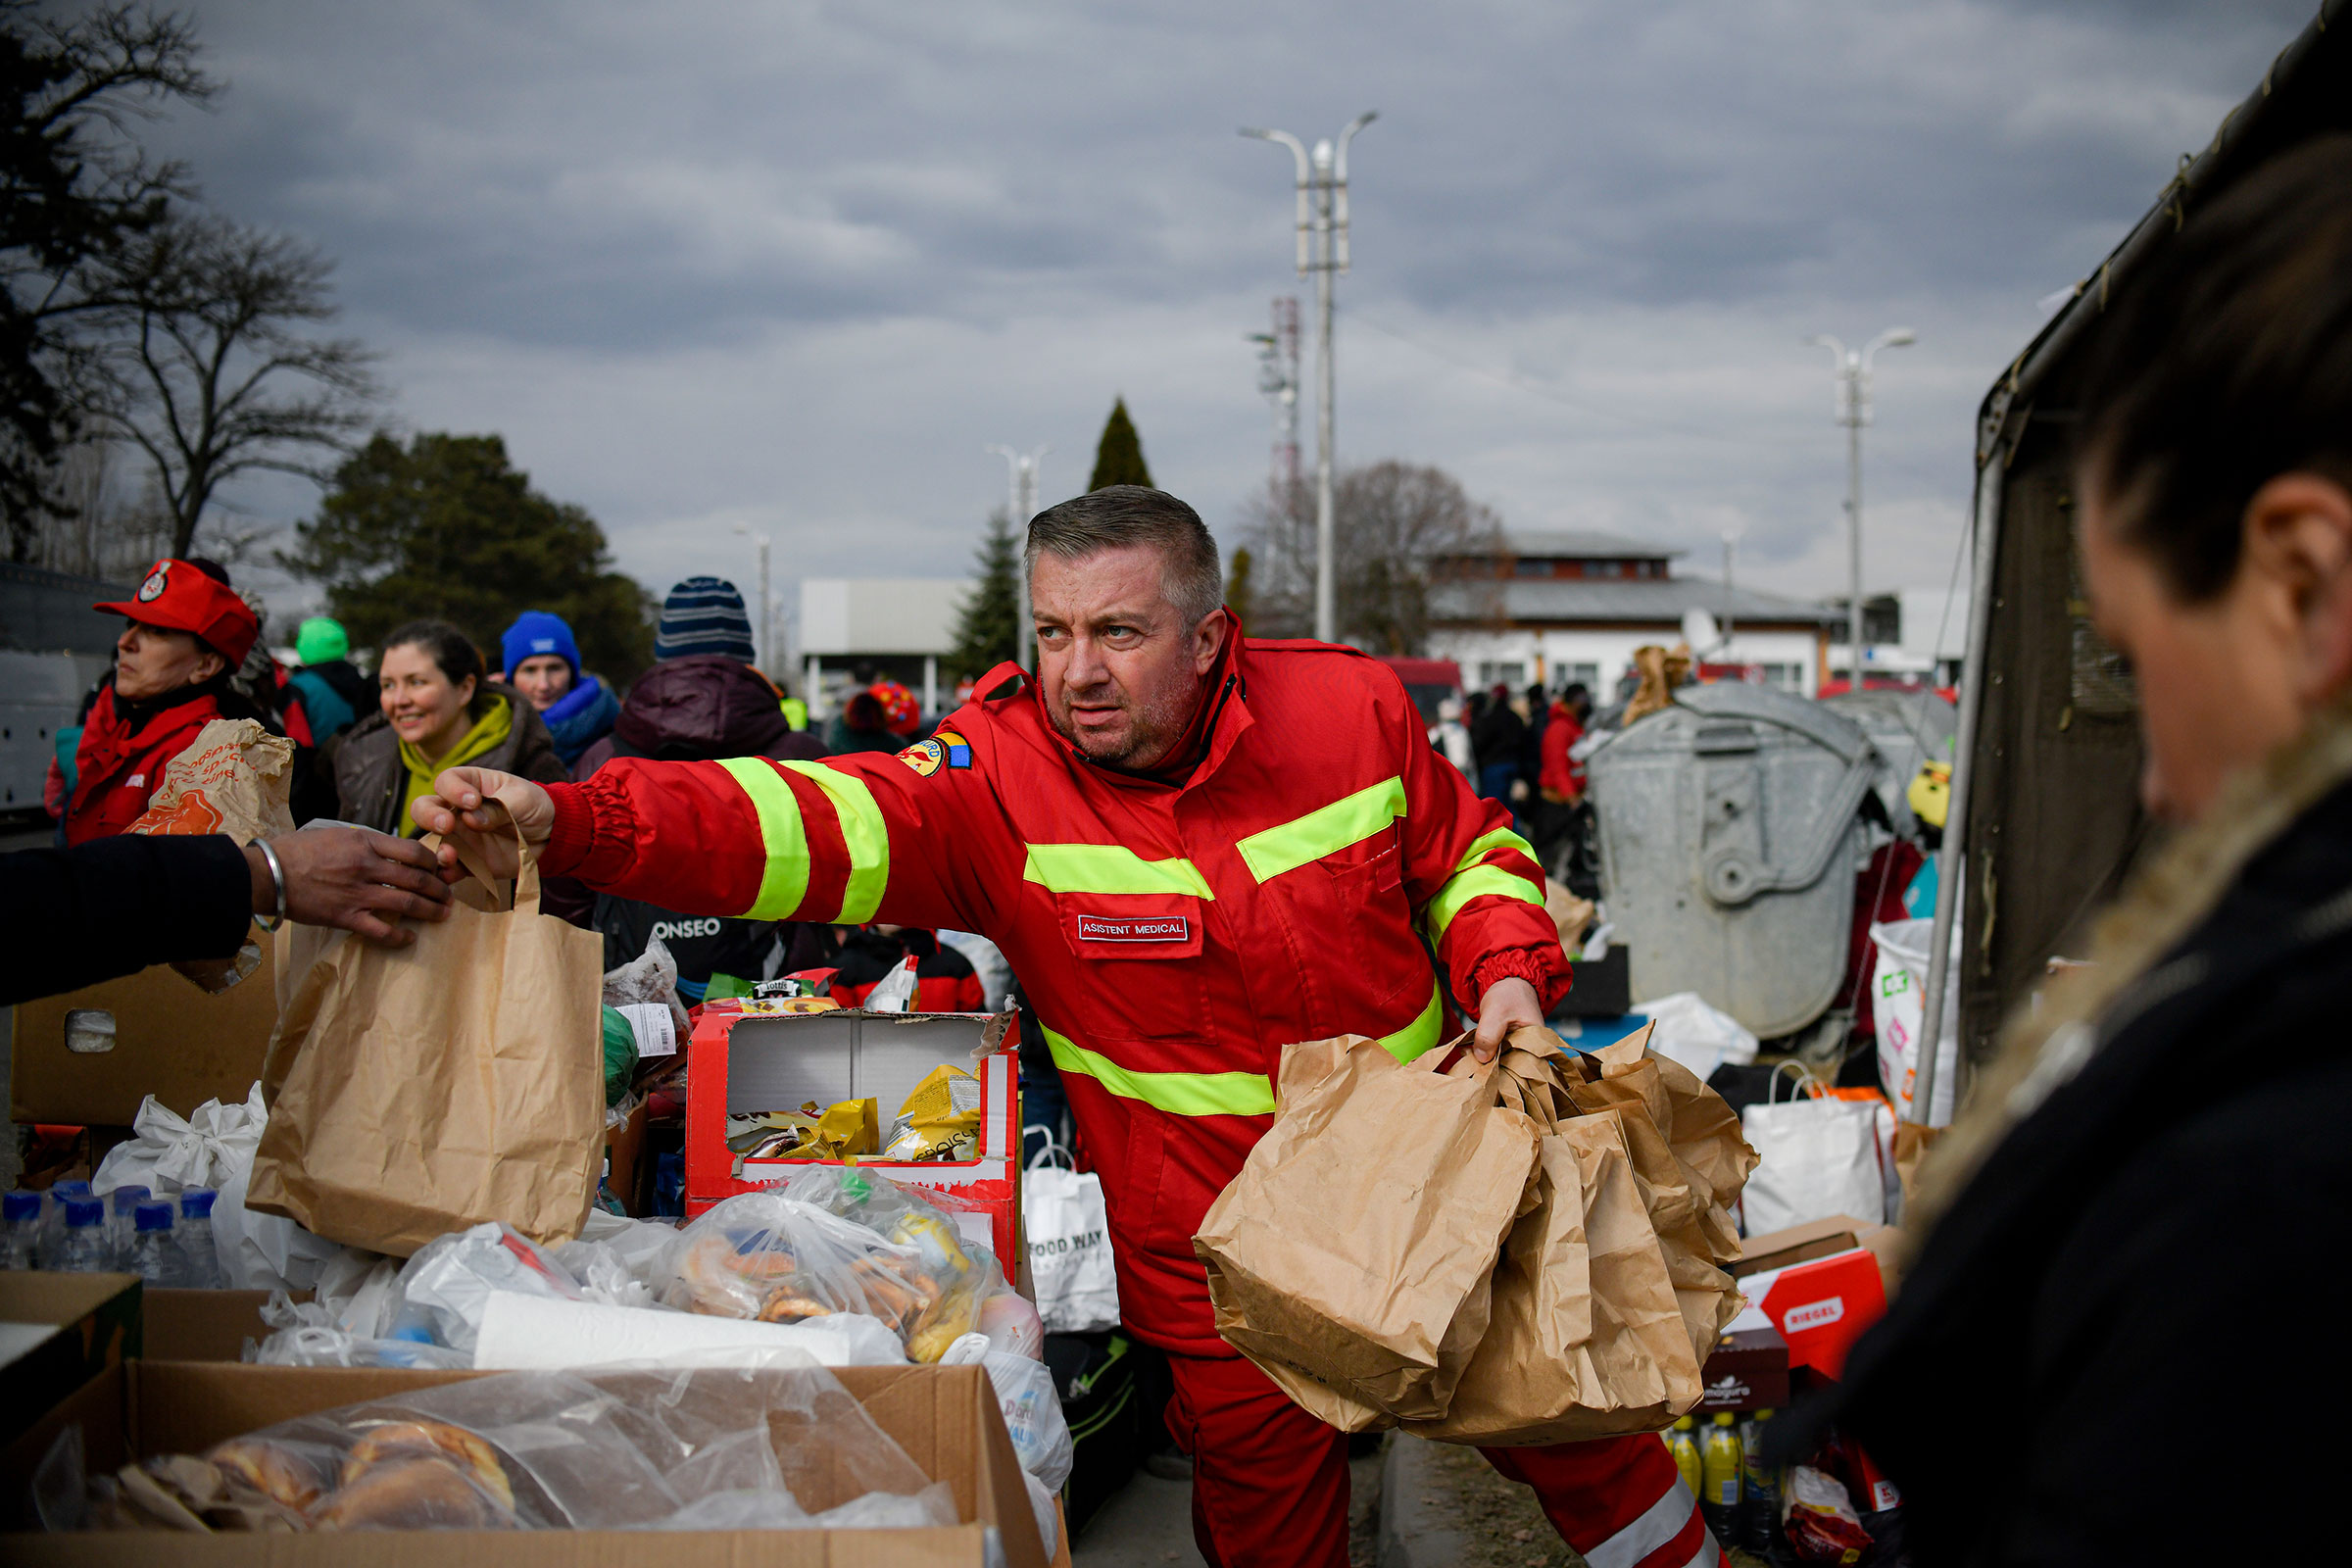 An employee of the Mobile Emergency Service for Resuscitation and Extrication, SMURD, hands out bags of food to refugees that fled the conflict from Ukraine at the Romanian-Ukrainian border, on Feb. 27, 2022. (Andreea Alexandru—AP)